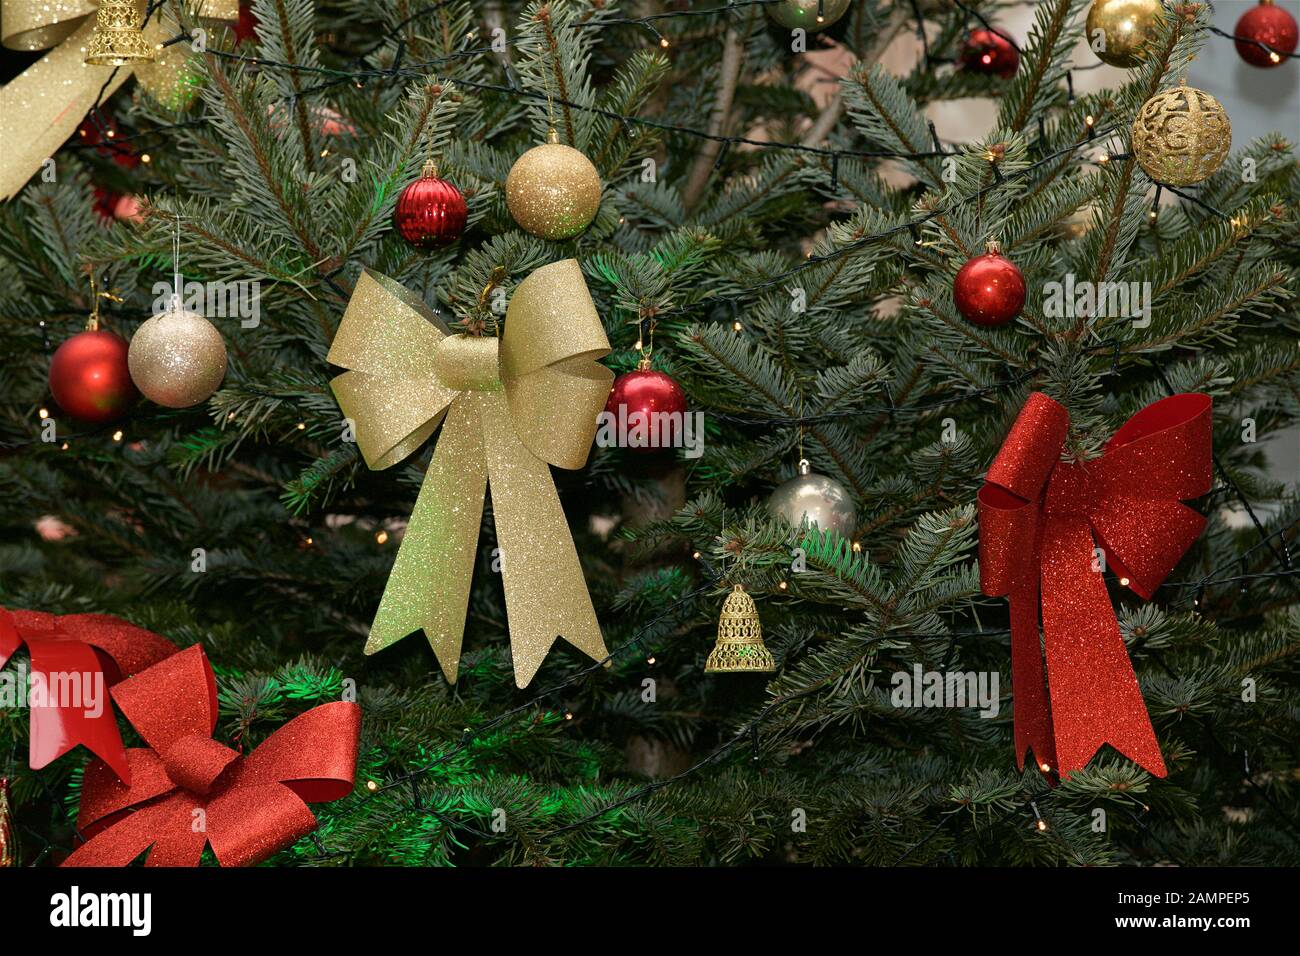 Christmas background: close up shot of a decorated Christmas tree with ribbons and baubles. Stock Photo